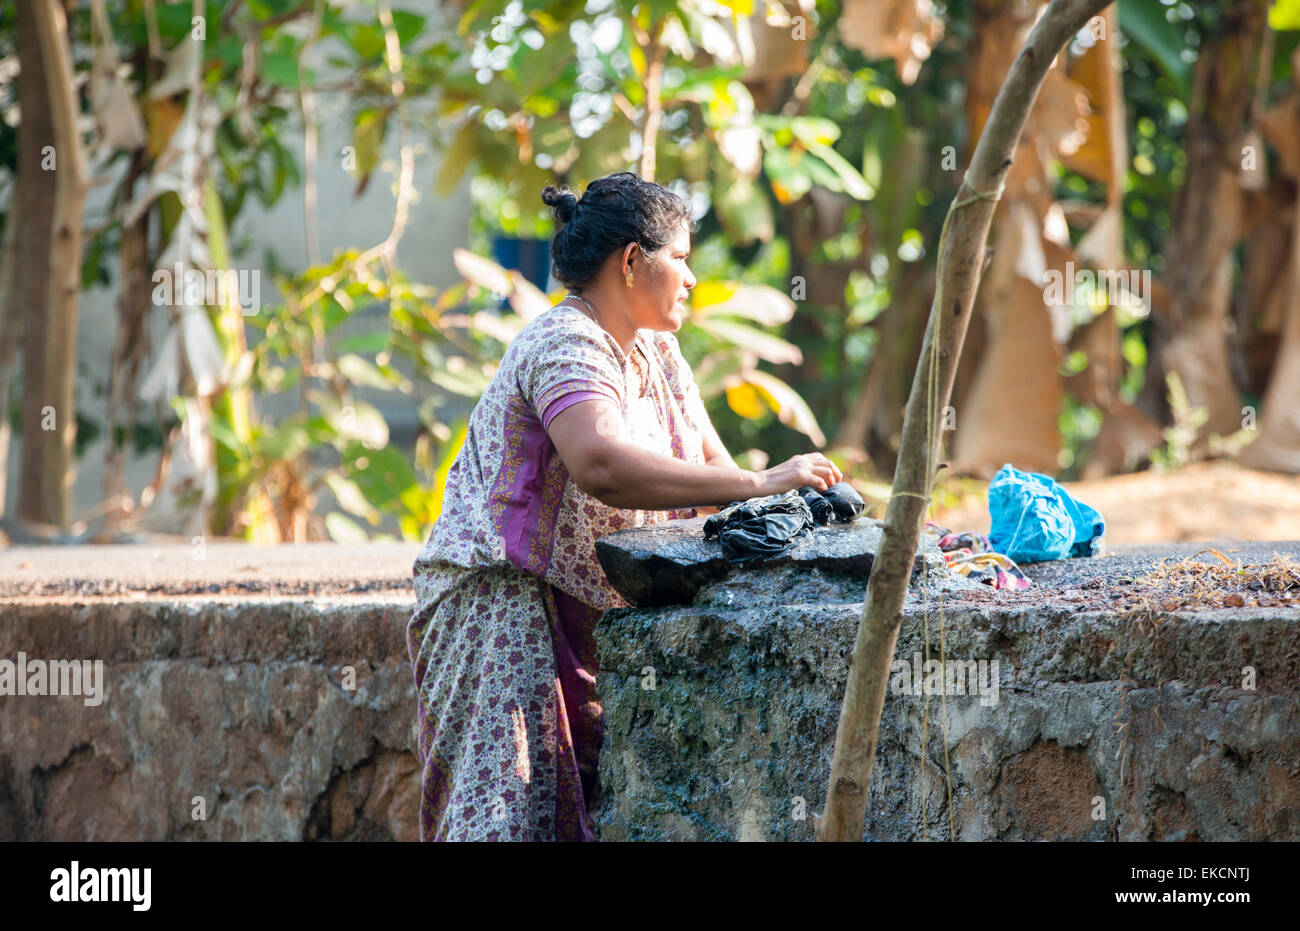 A woman washing her clothes on the banks of the Backwaters of Kumarakom, Kerala India Stock Photo